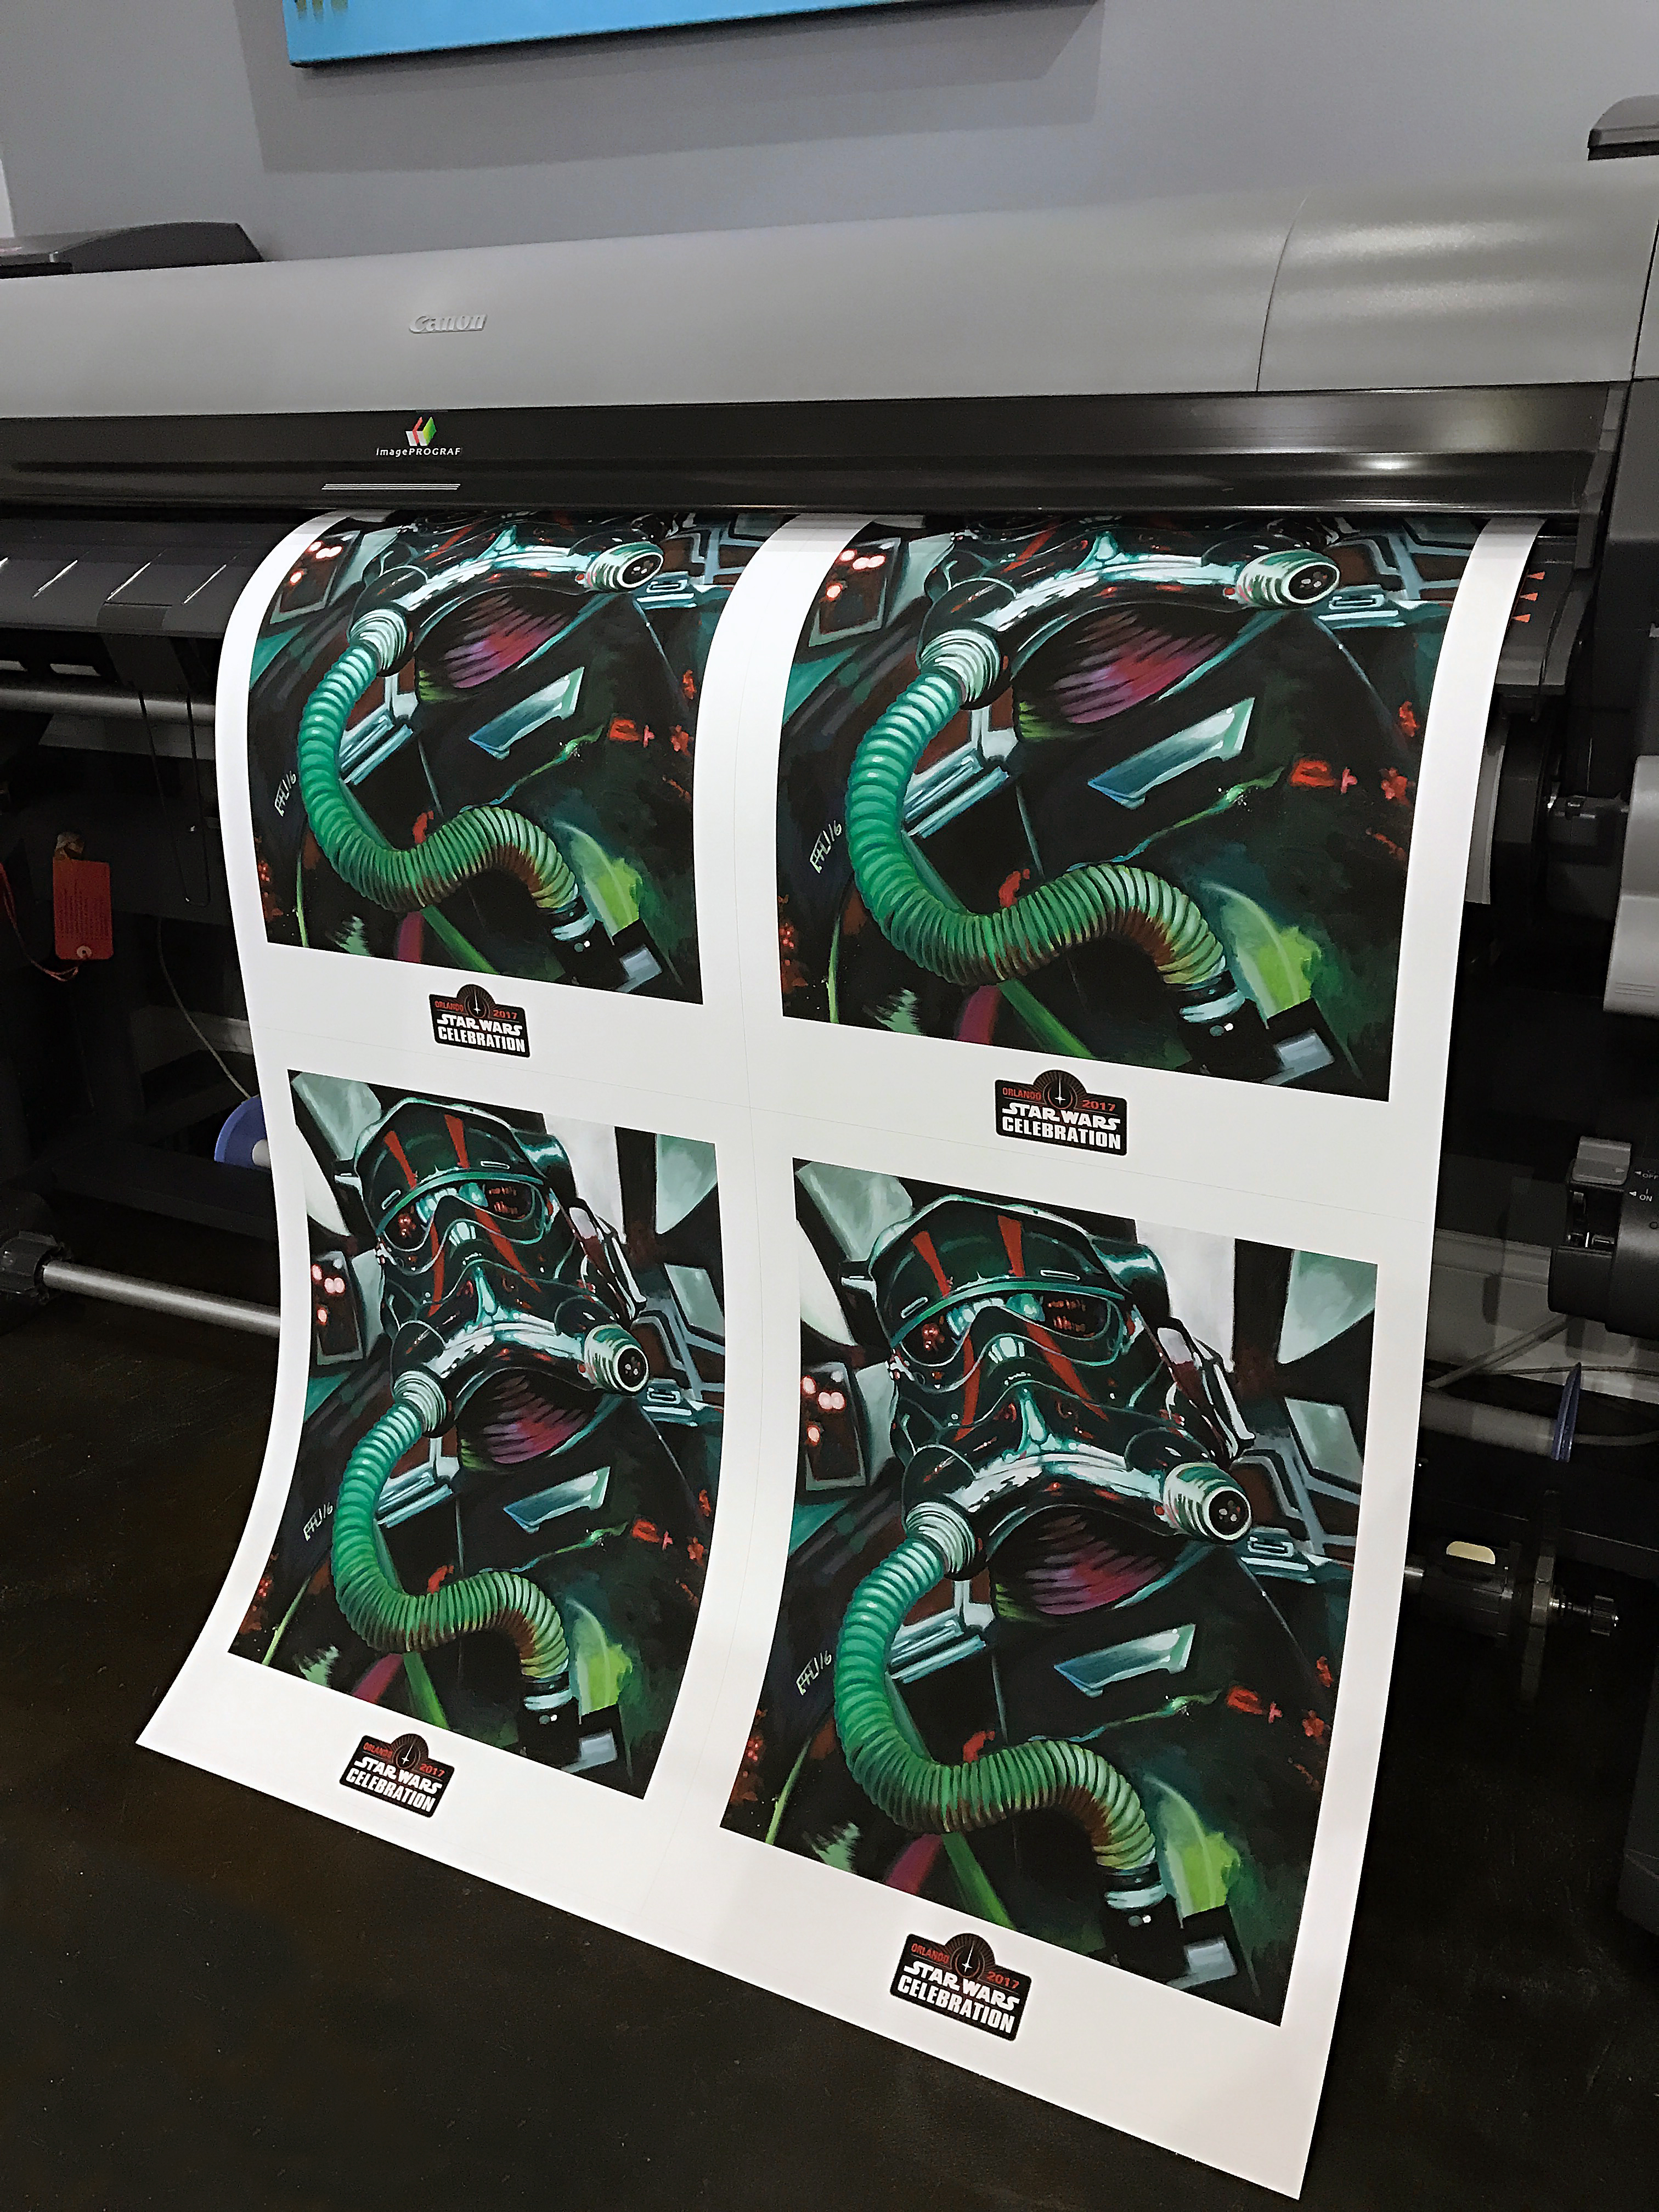 One of our Canon printers printing artwork by Brad Hudson